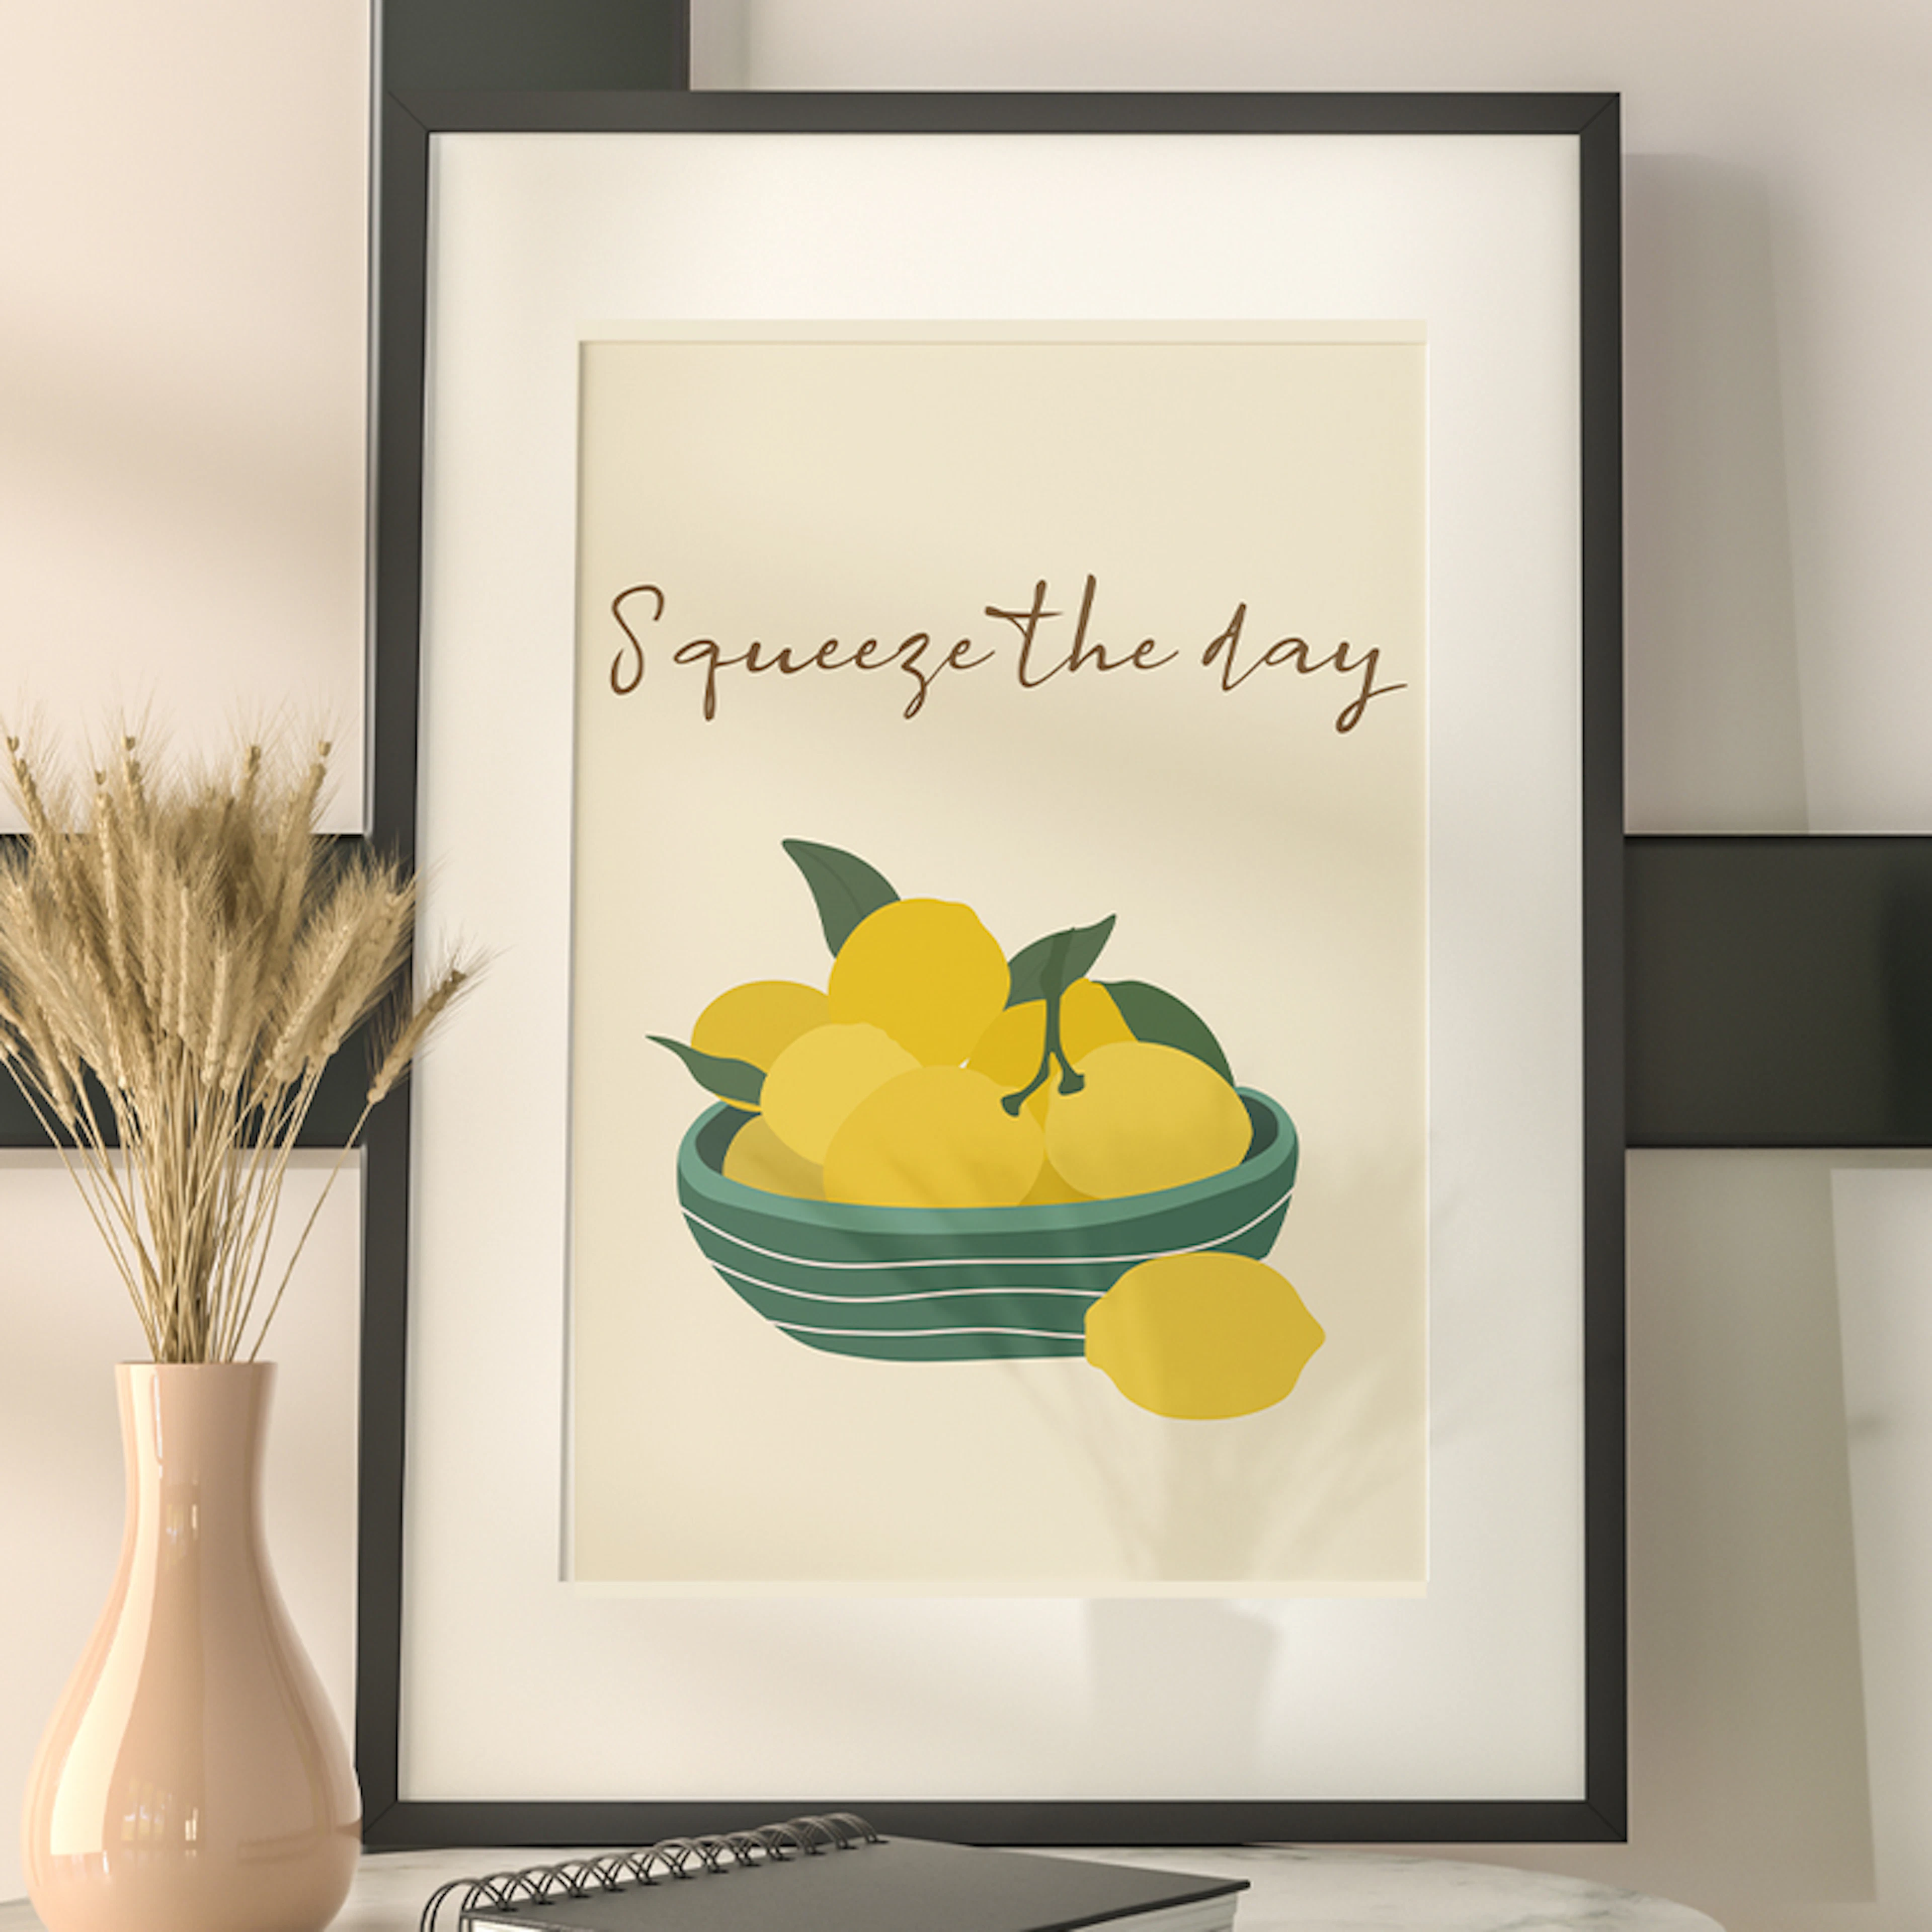 Squeeze the Day - Lemon Illustration